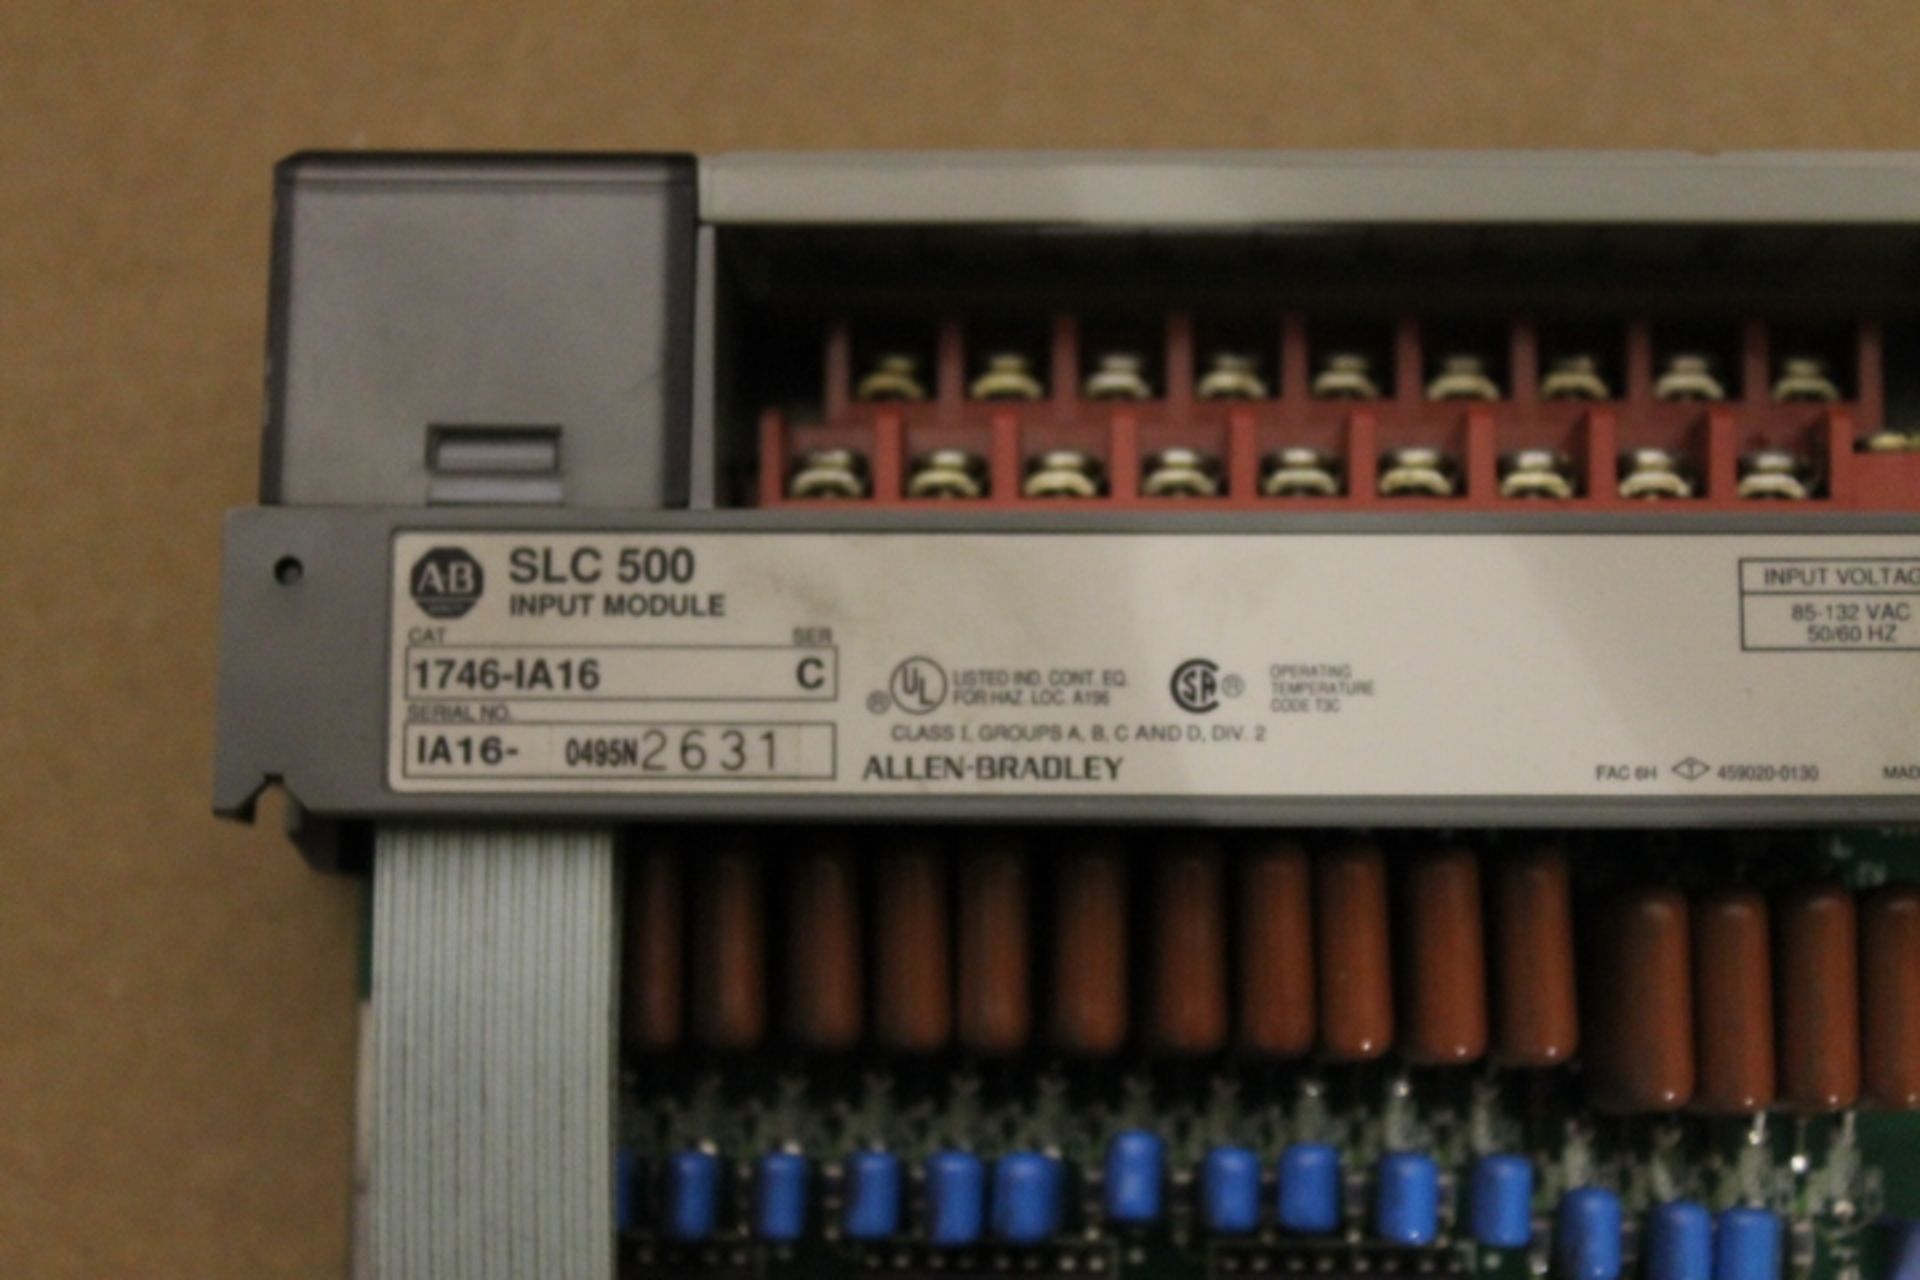 ALLEN-BRADLEY SLC 500 RACK W/ VARIOUS CARDS (SEE PICTURES) - Image 4 of 4